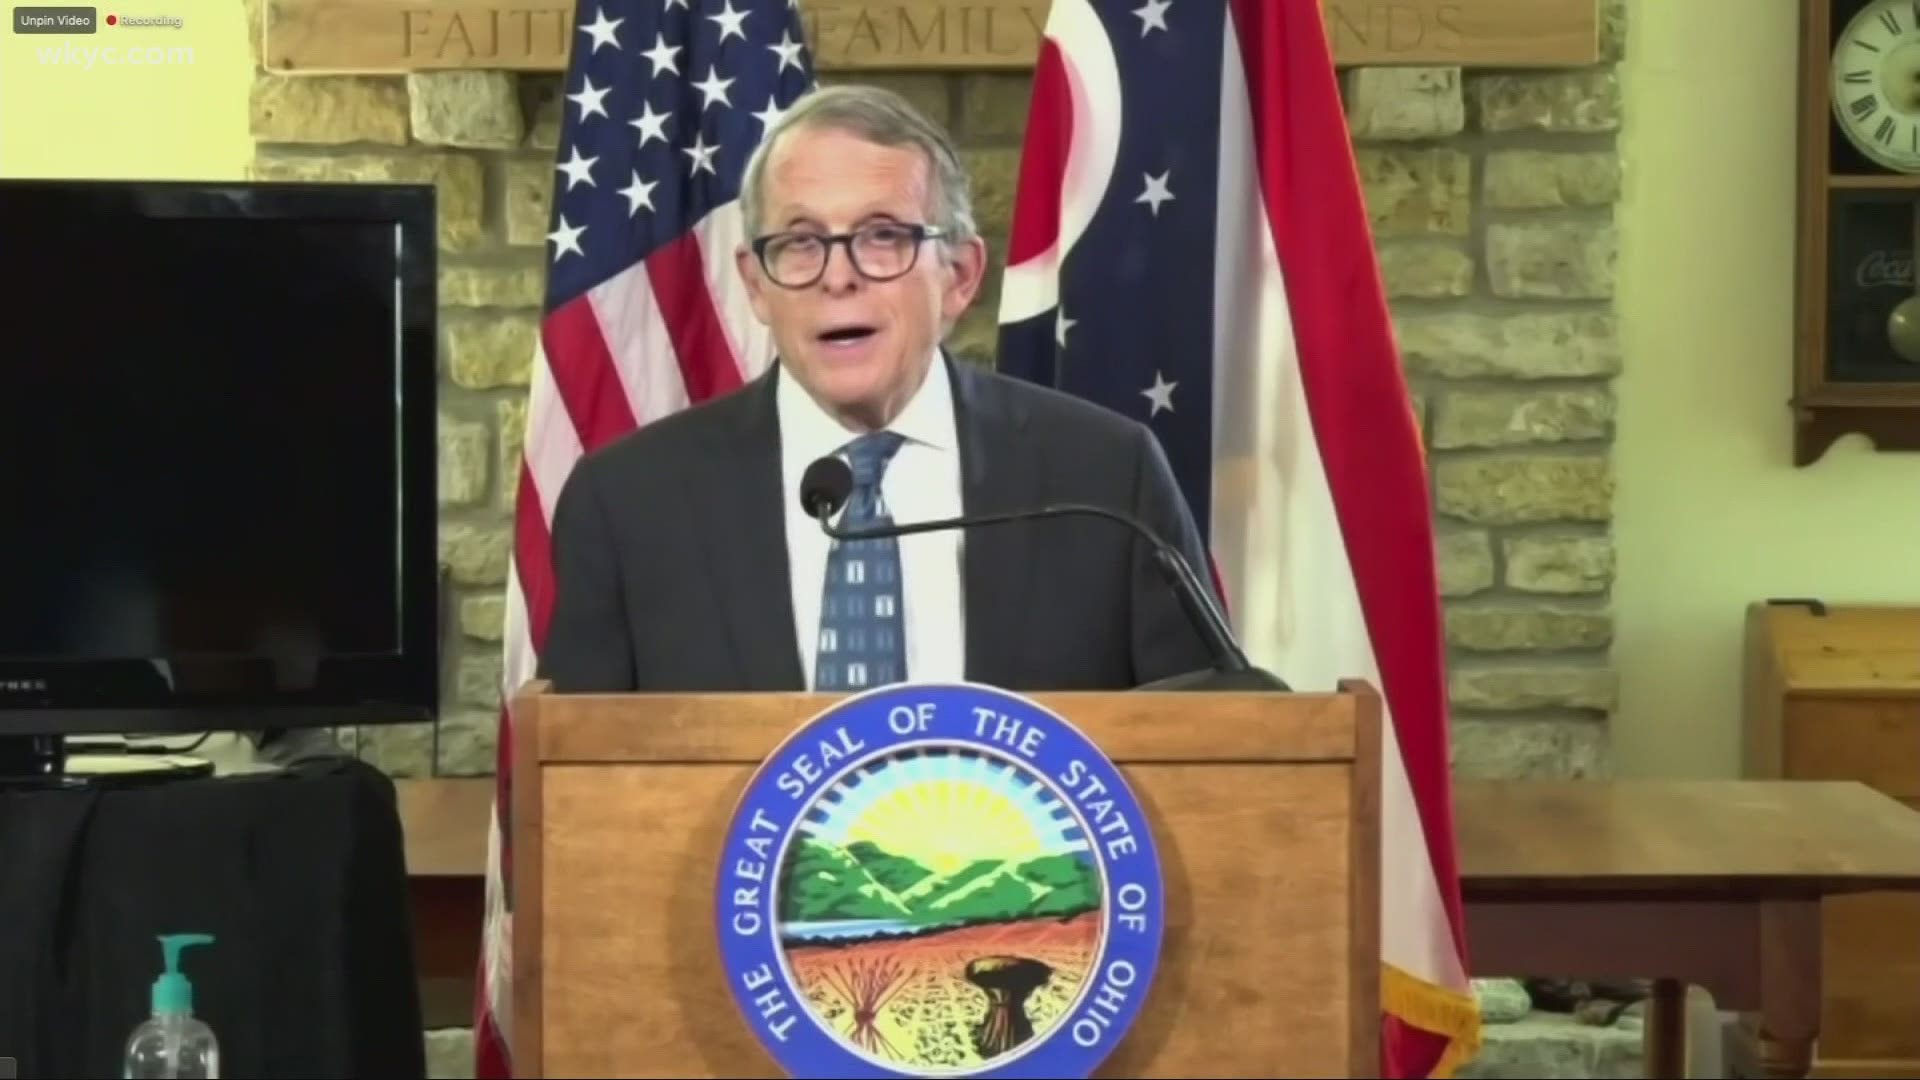 From high school sports to racial disparities to the state of Cuyahoga County.Gov. DeWine laid out what's next for Ohio, Laura Caso has the details.